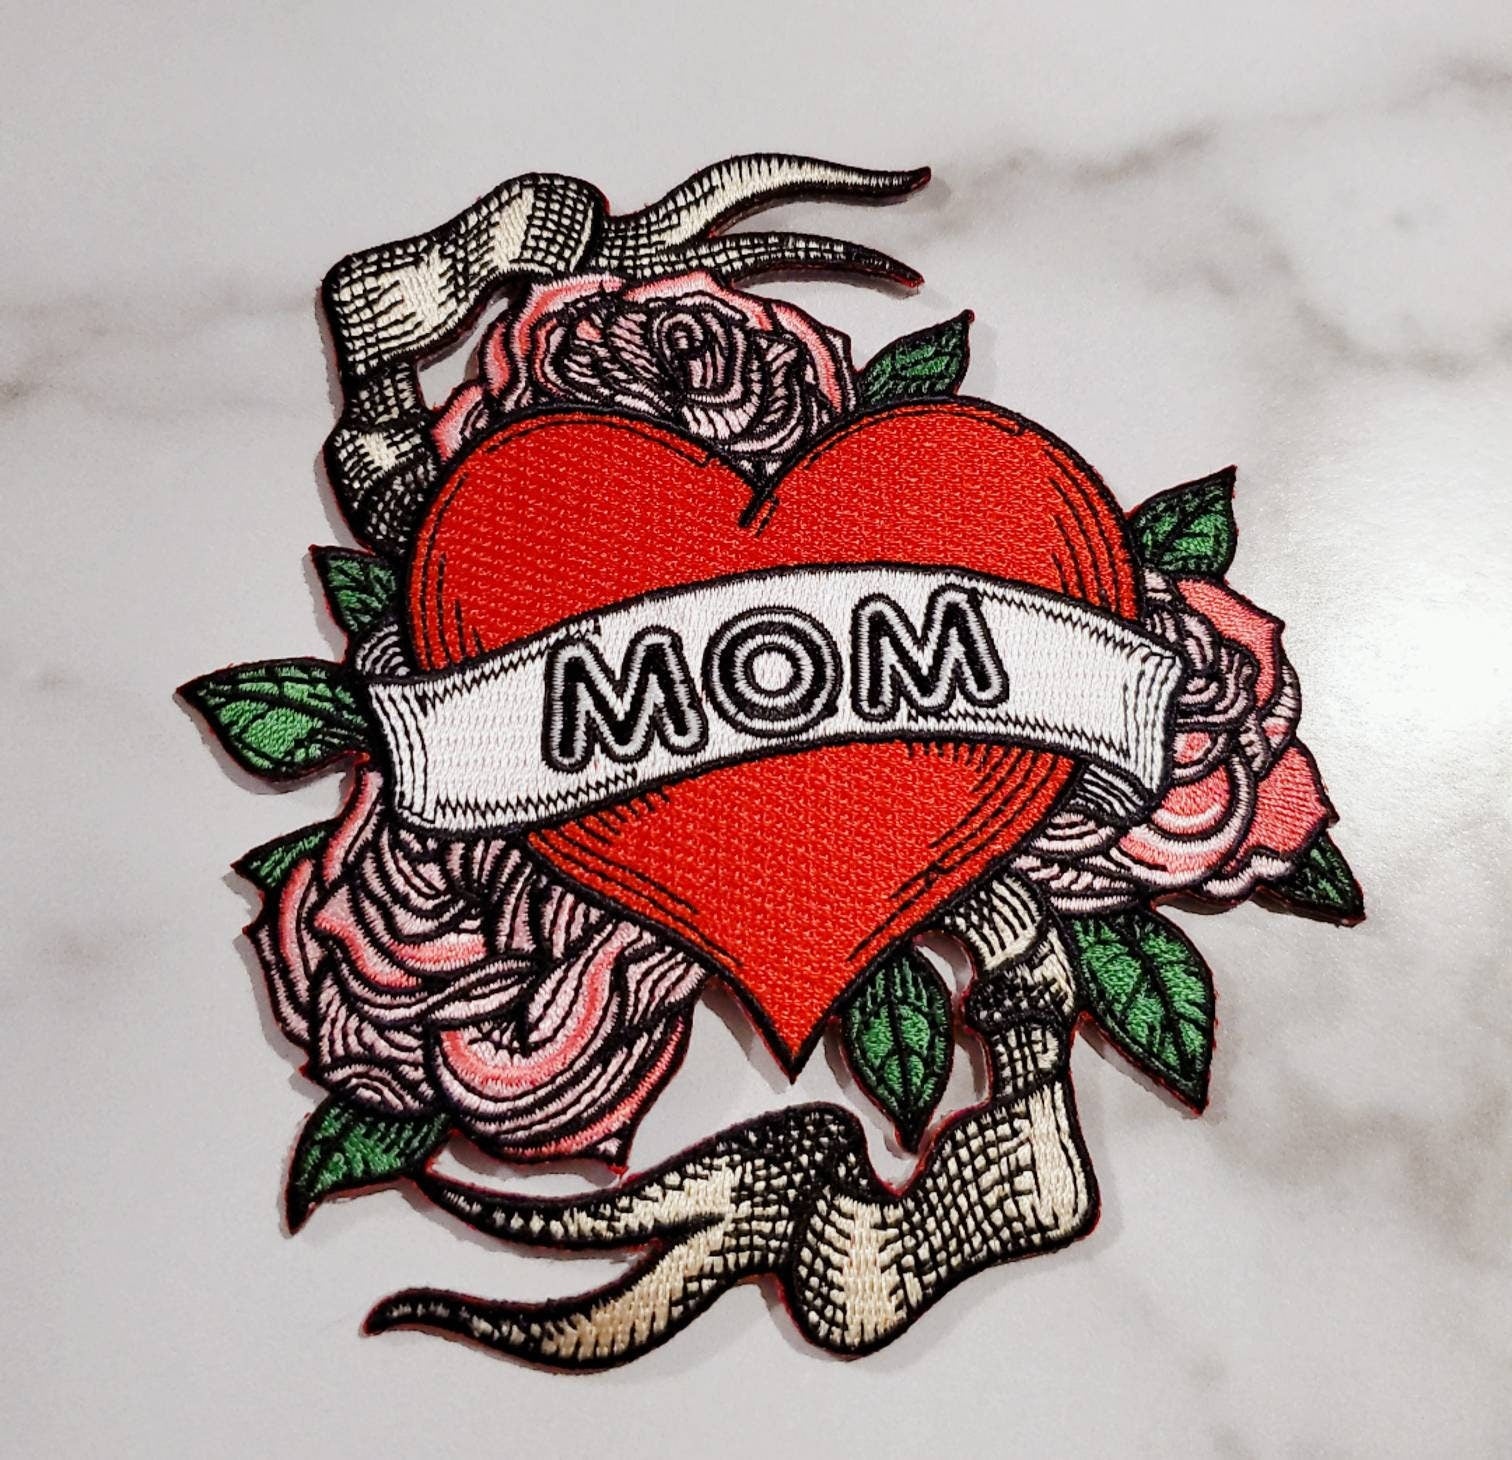 Trendy Woven Label Patch Washable Iron On Cute Patches For Clothes